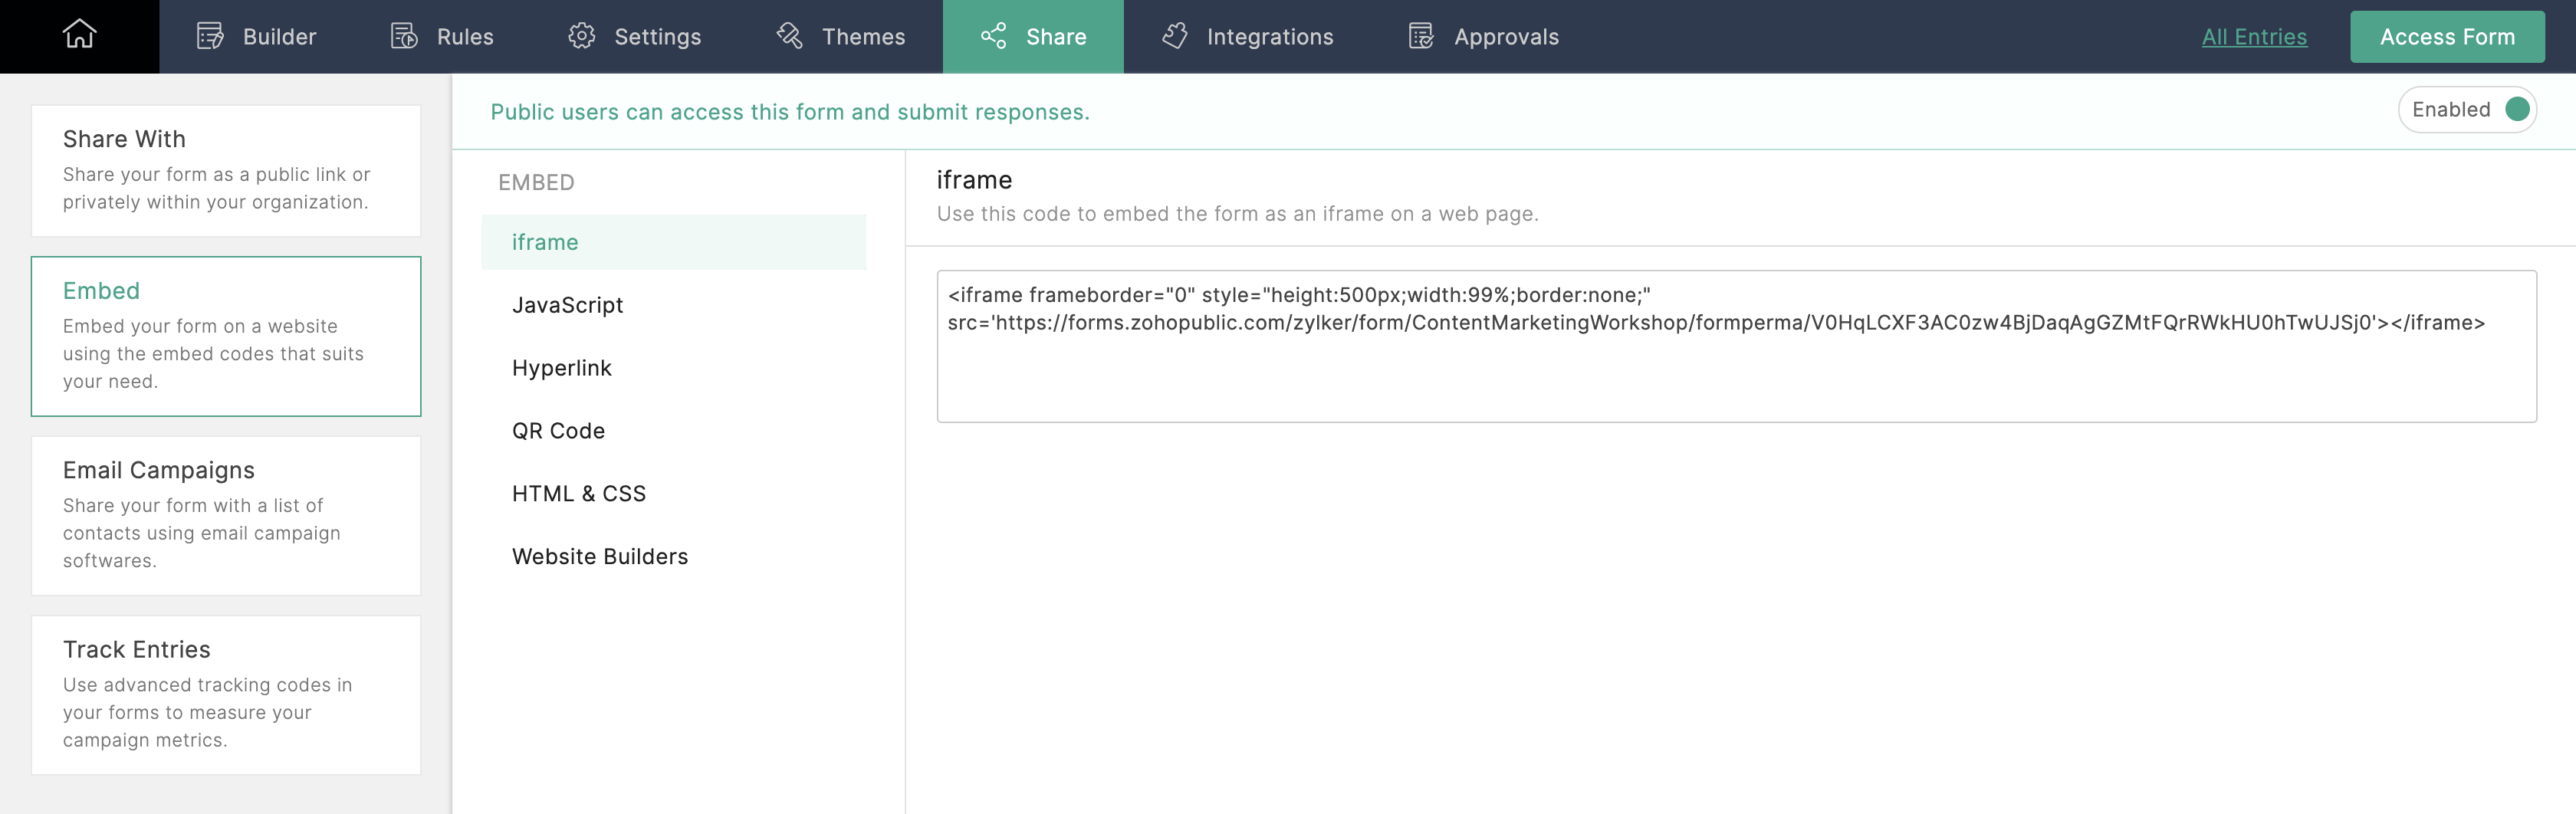 Embed a form using iframe